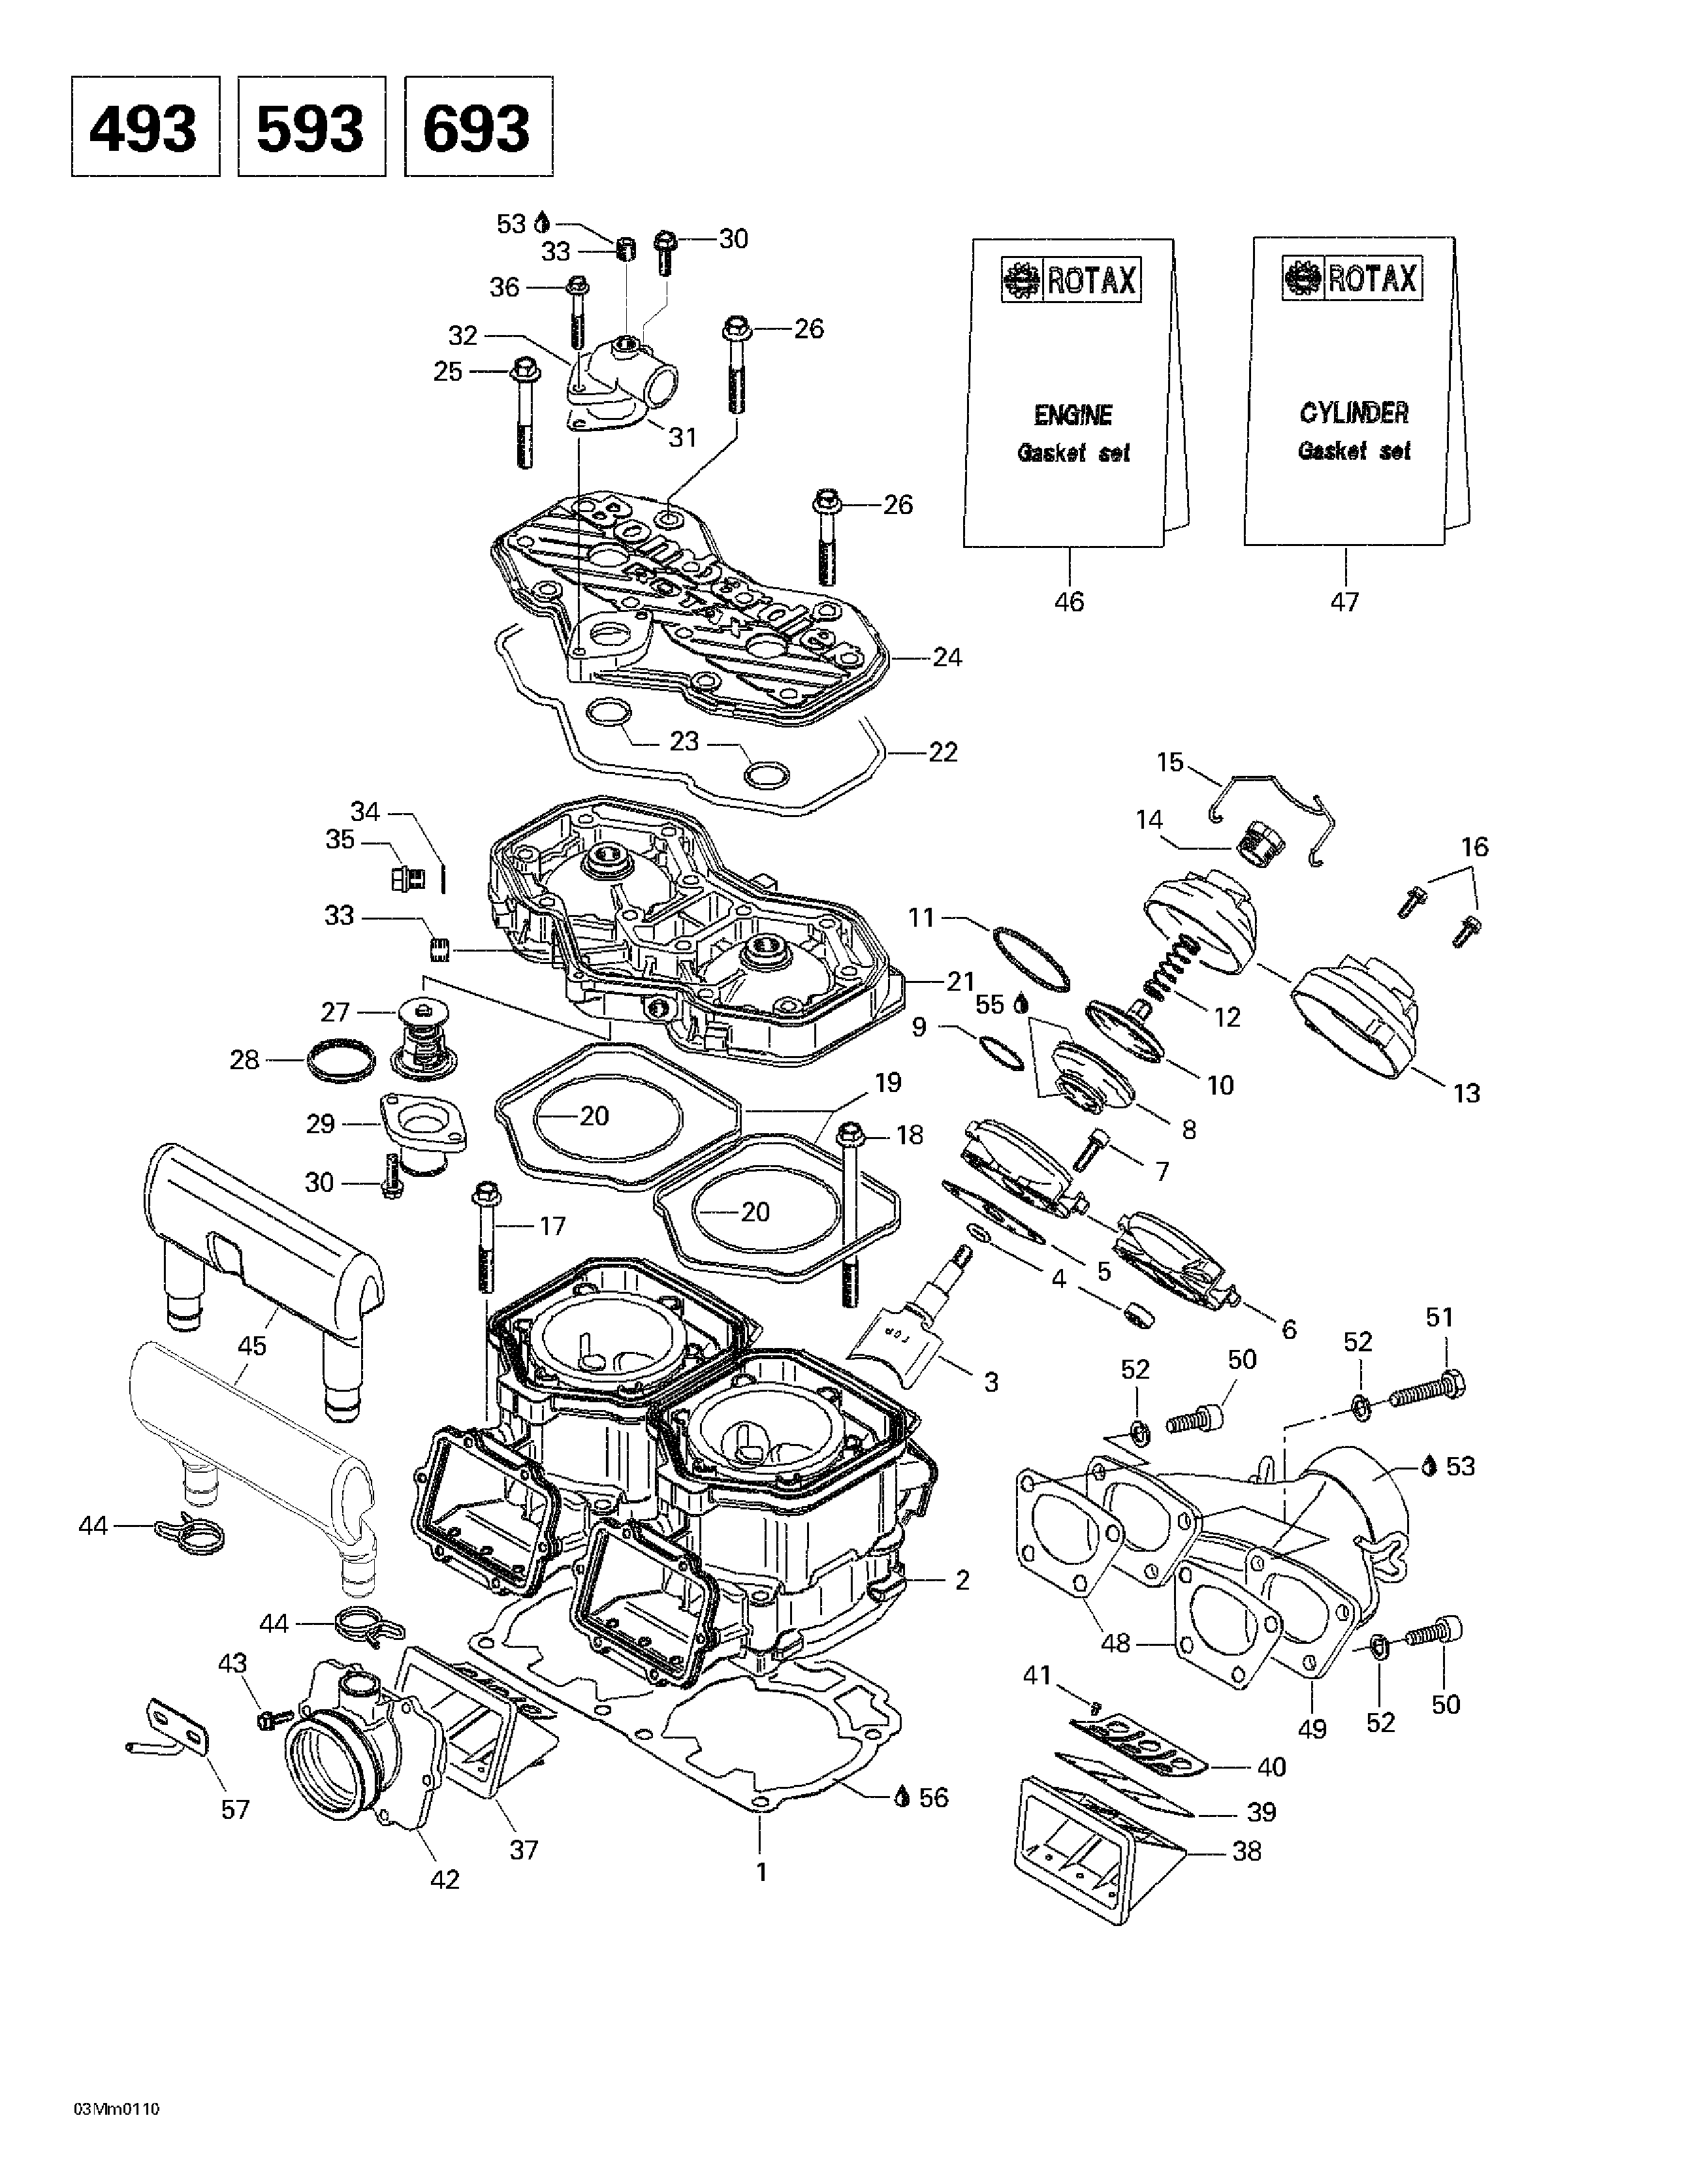 Cylinder, exhaust manifold, reed valve